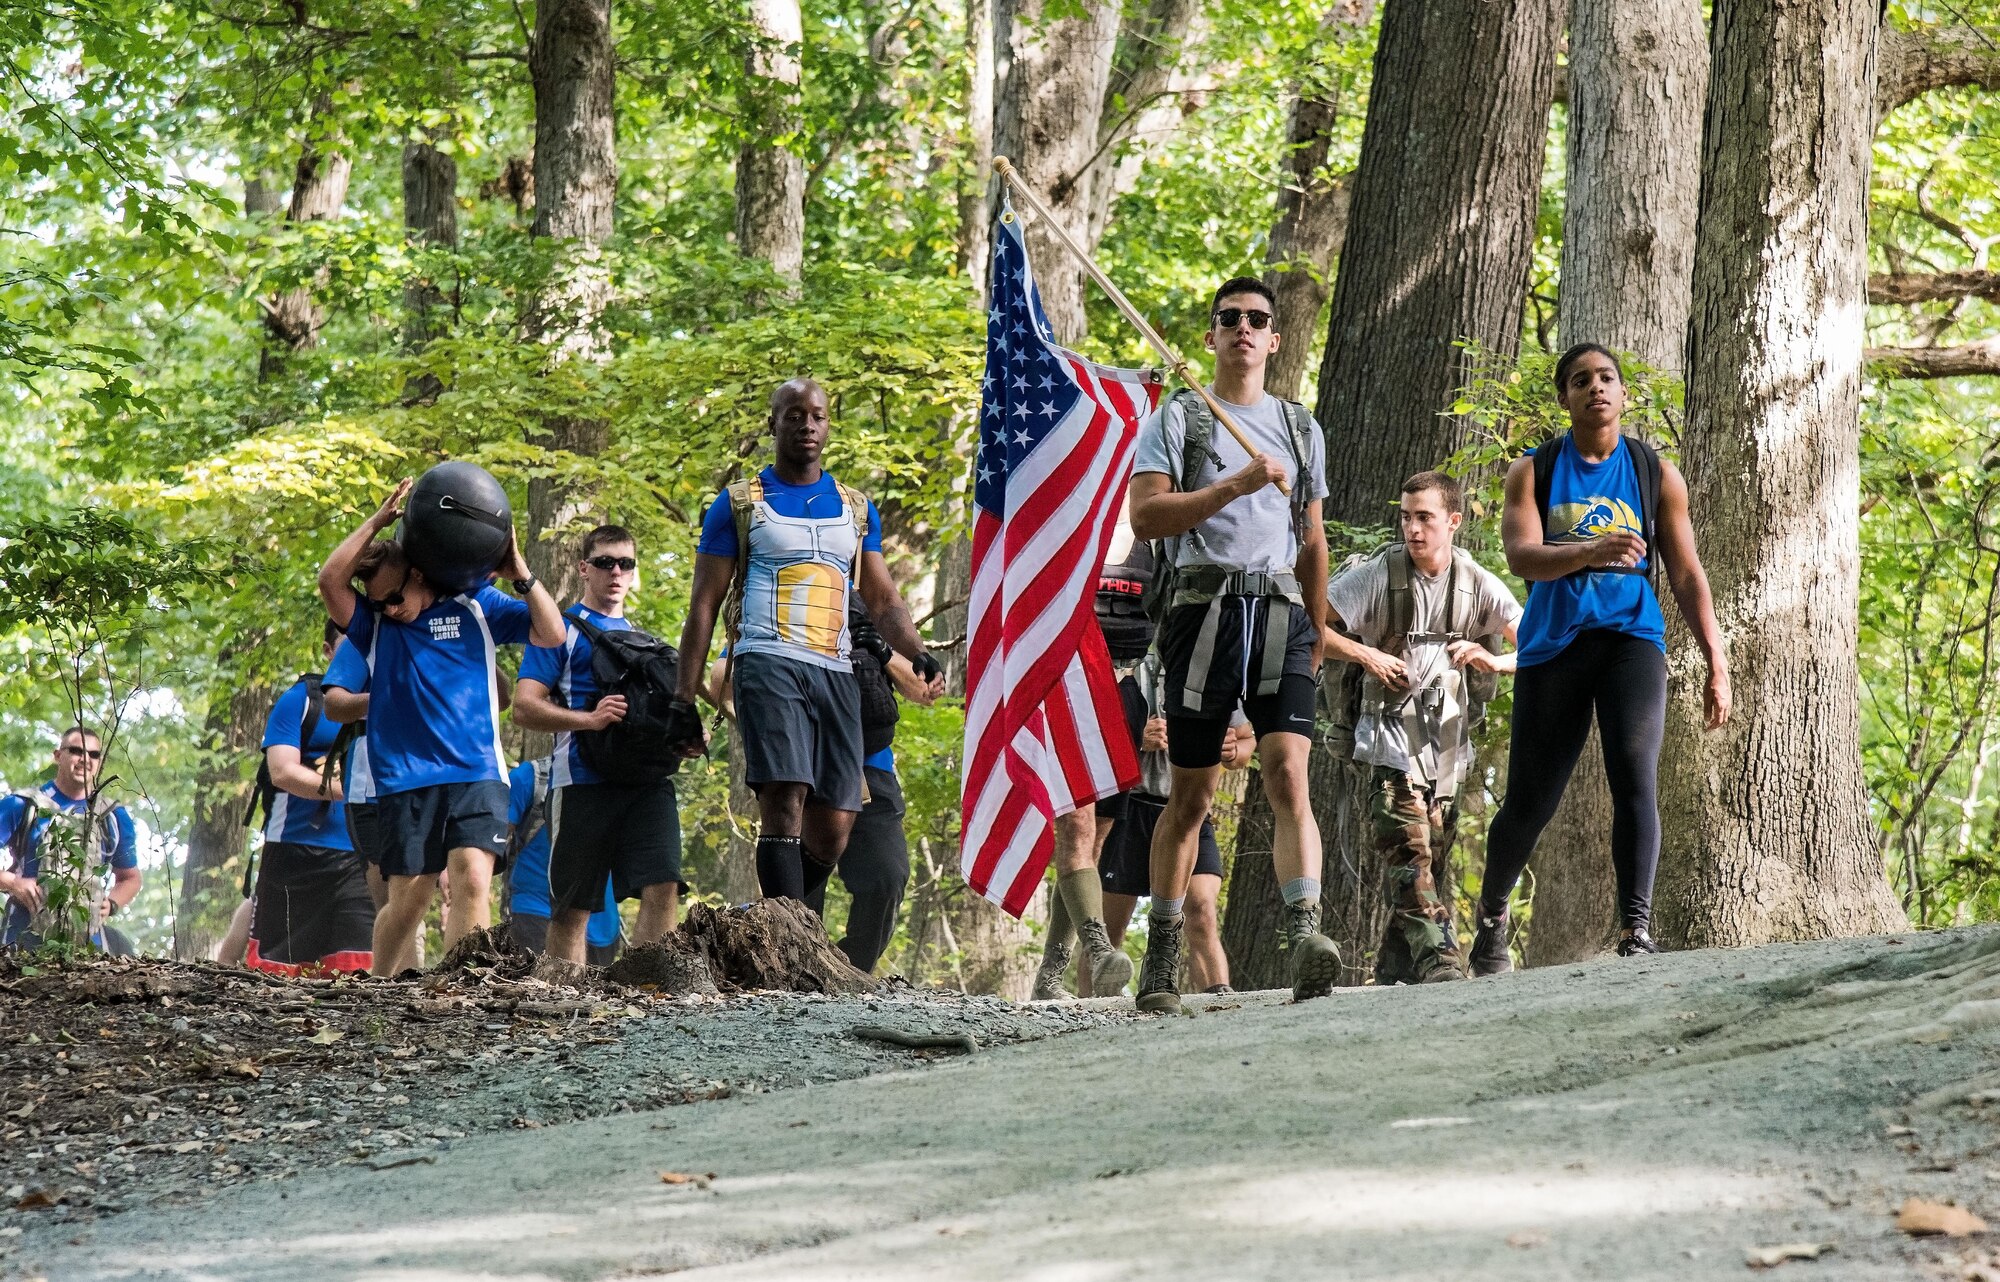 Participants in the 2017 GORUCK Light Challenge make their way around the hiking trail Oct. 6, 2017, at Brecknock Park in Camden, Del. Participants completed three laps while carrying their rucksack, chains and a punching bag. (U.S. Air Force photo by Roland Balik)